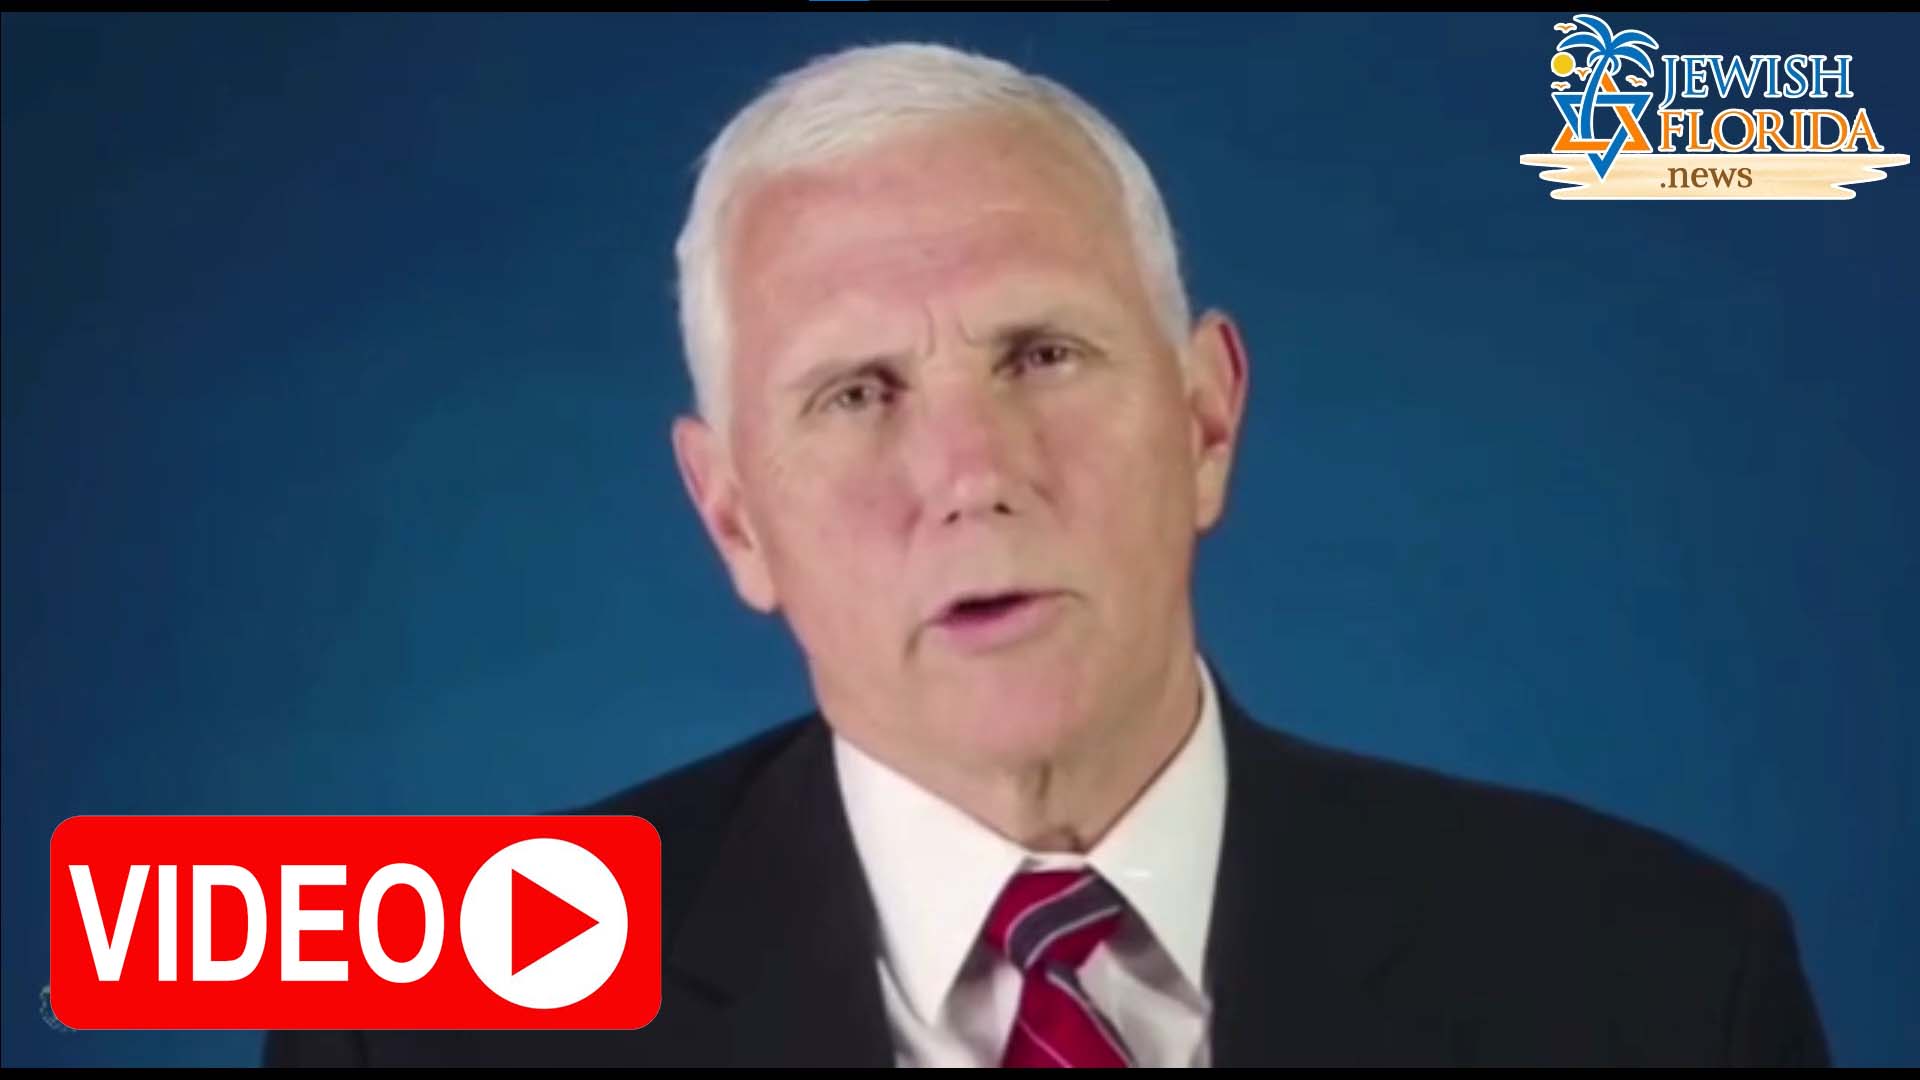 VP Pence Voices Support for Israel